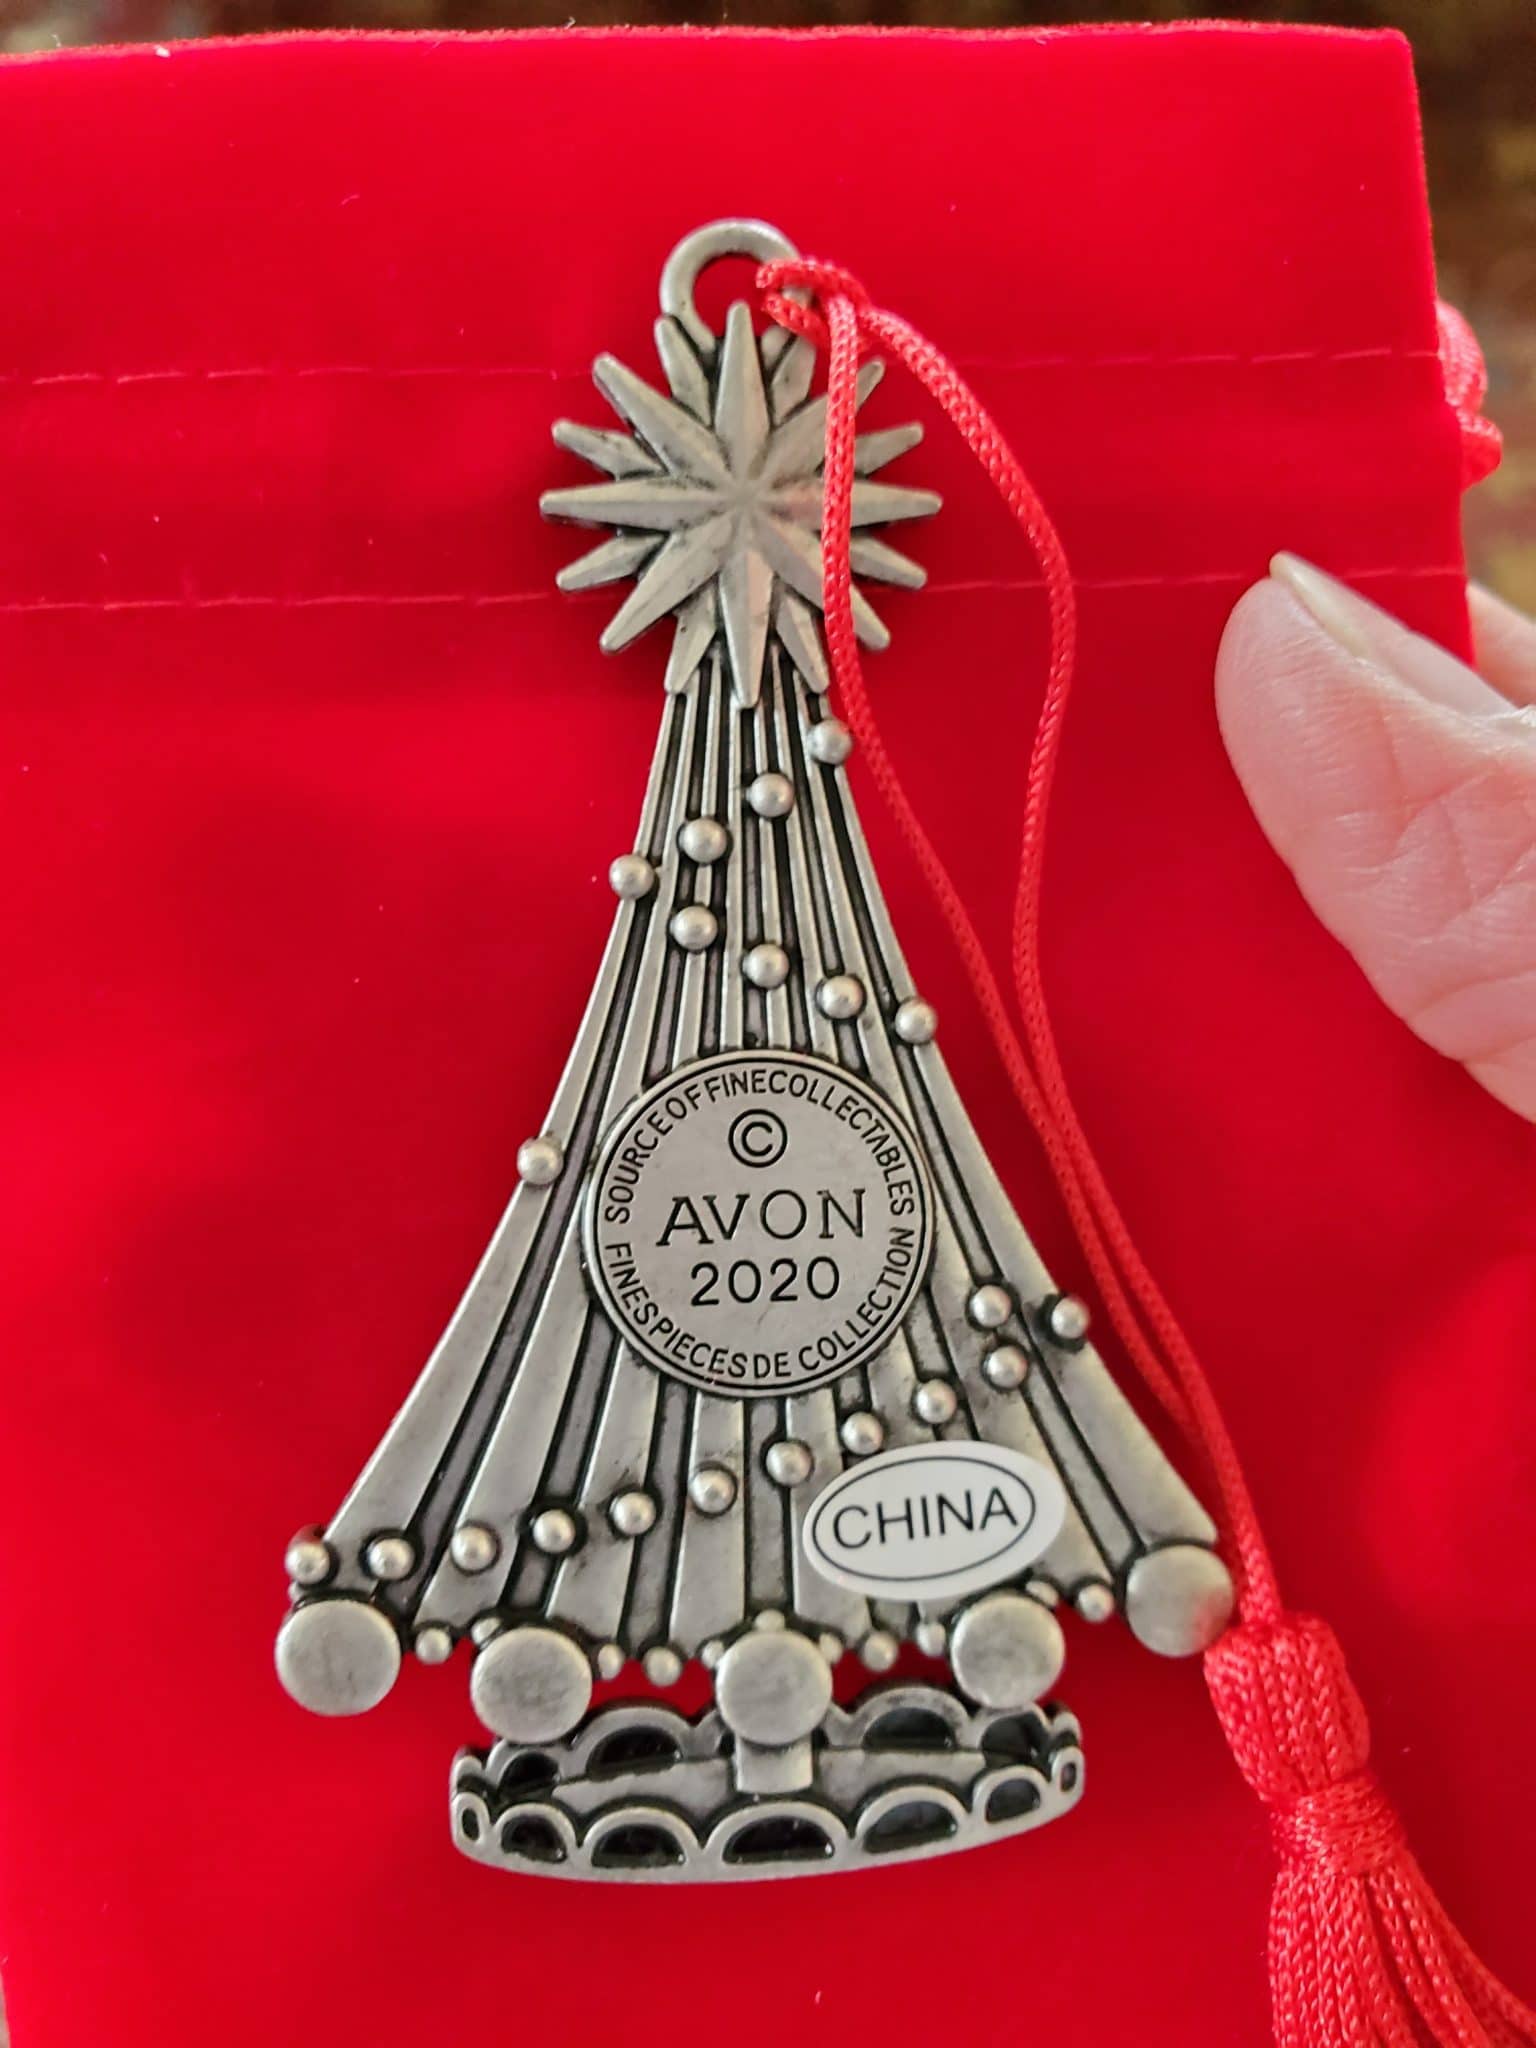 NEW Avon Pewter Ornaments 2020 Avon Holiday Collectibles